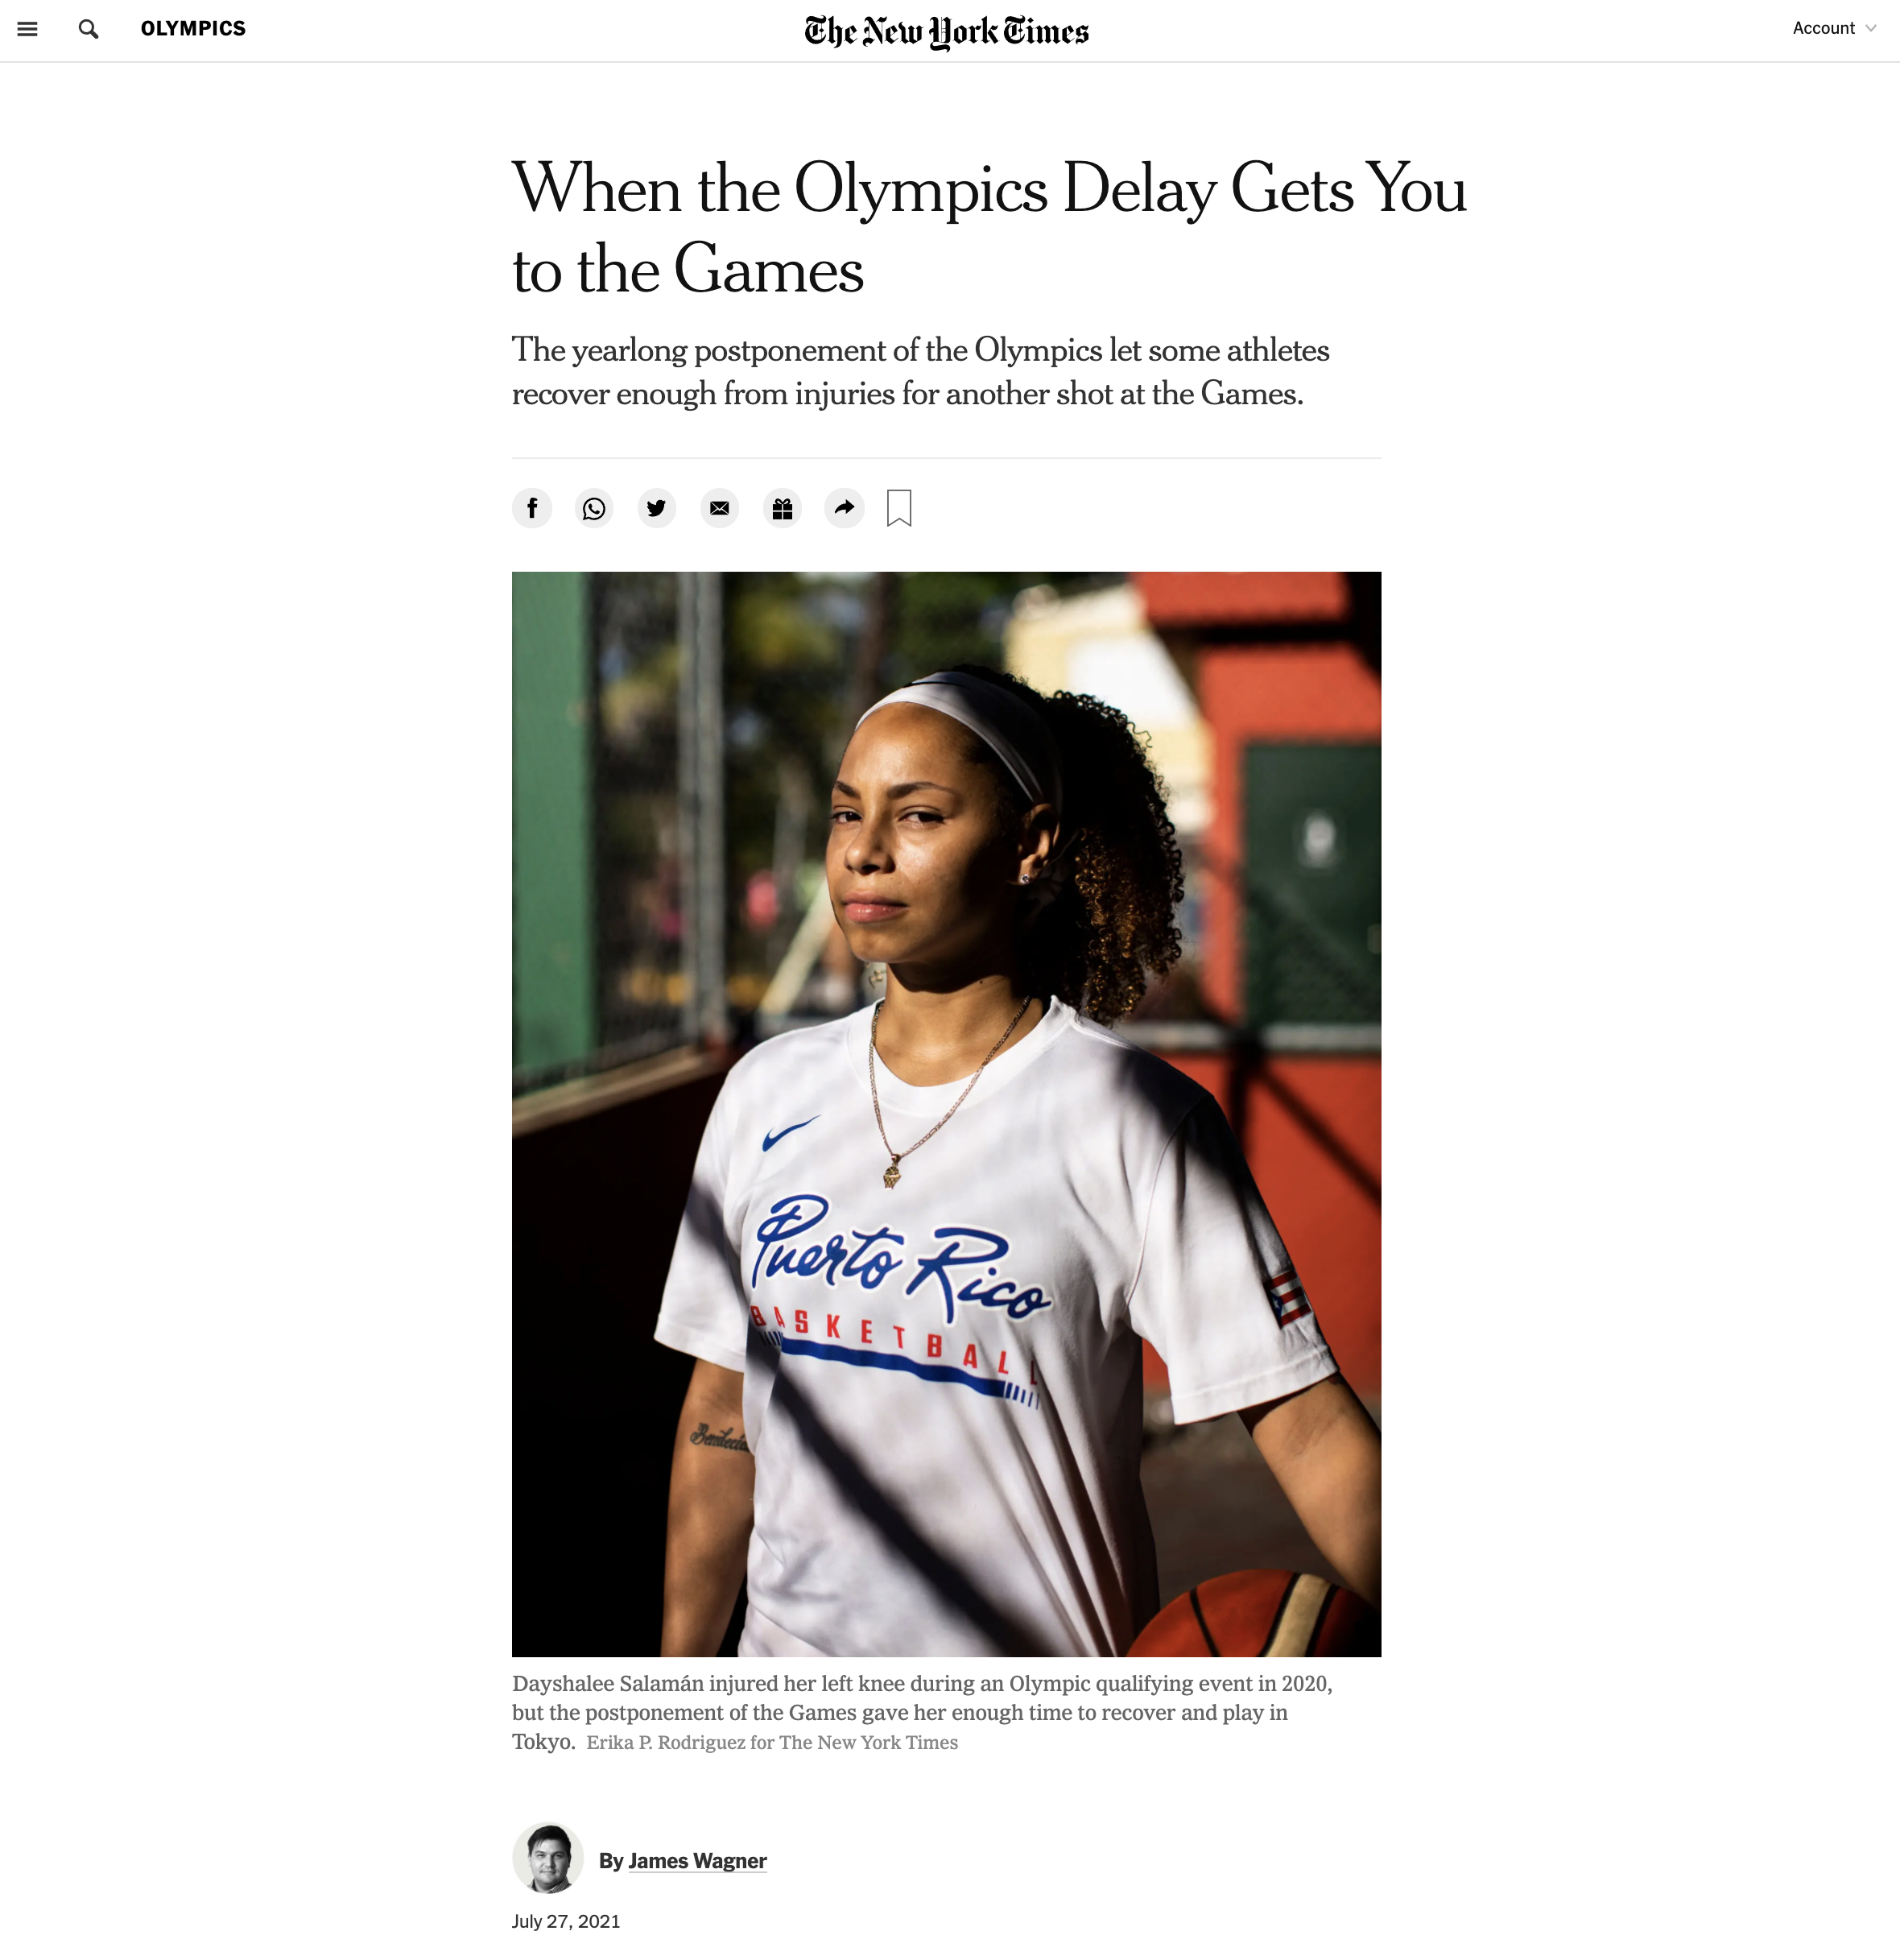 For NY Times: Dayshalee Salamán makes the Olympics